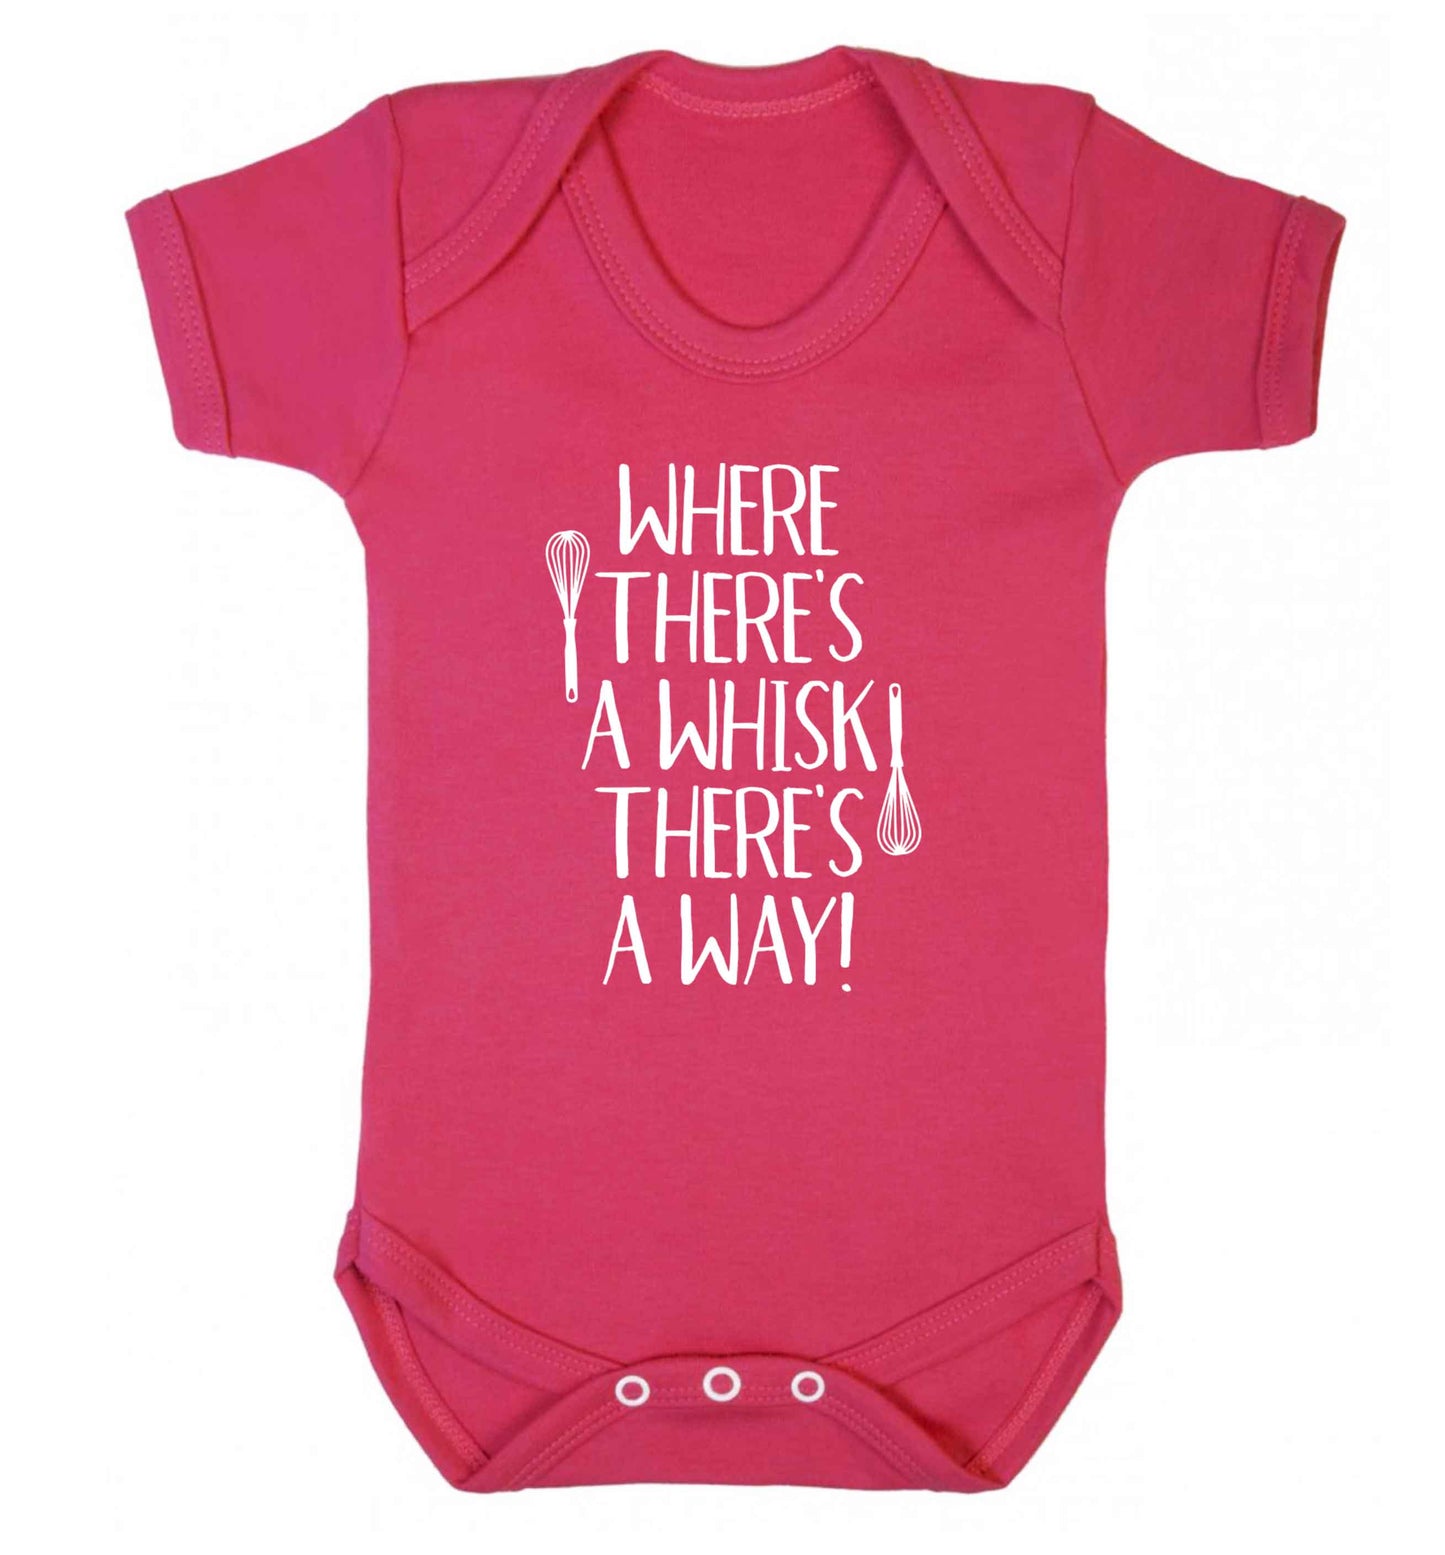 Where there's a whisk there's a way Baby Vest dark pink 18-24 months